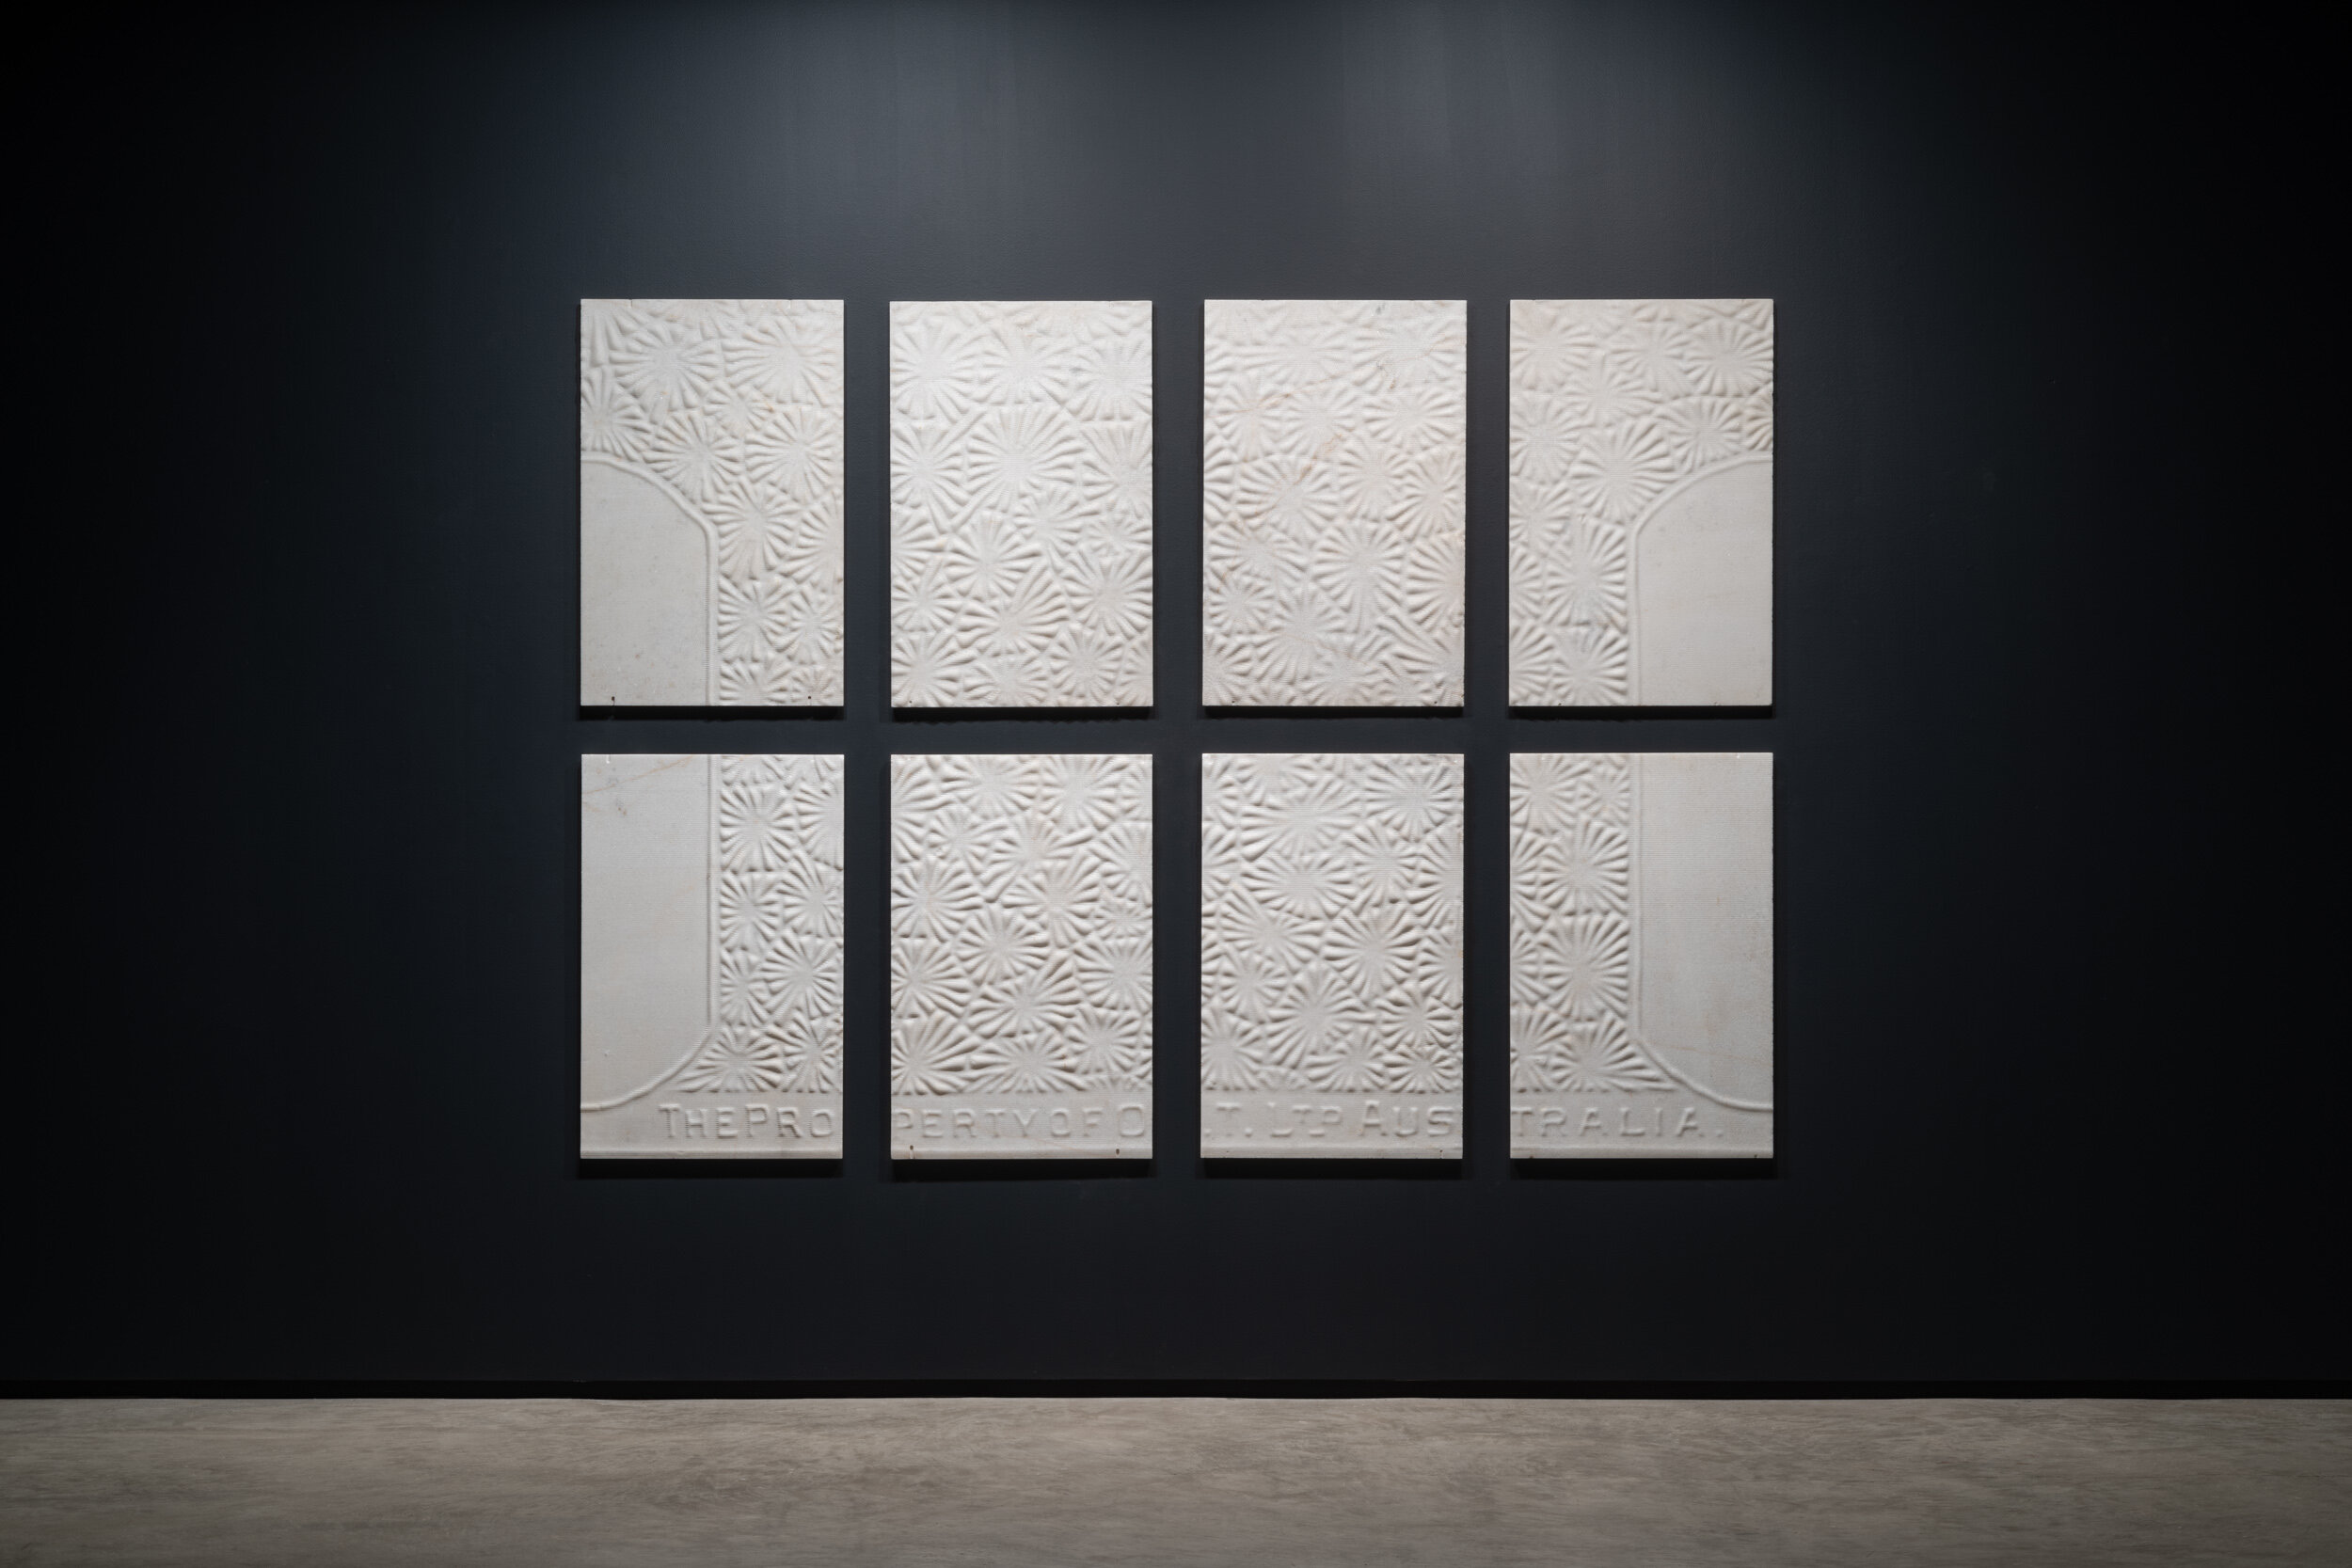  History is Buried In My Backyard, 2020. Wombeyan marble, 180 x 250cm (8 panels at 85x 55cm each).   